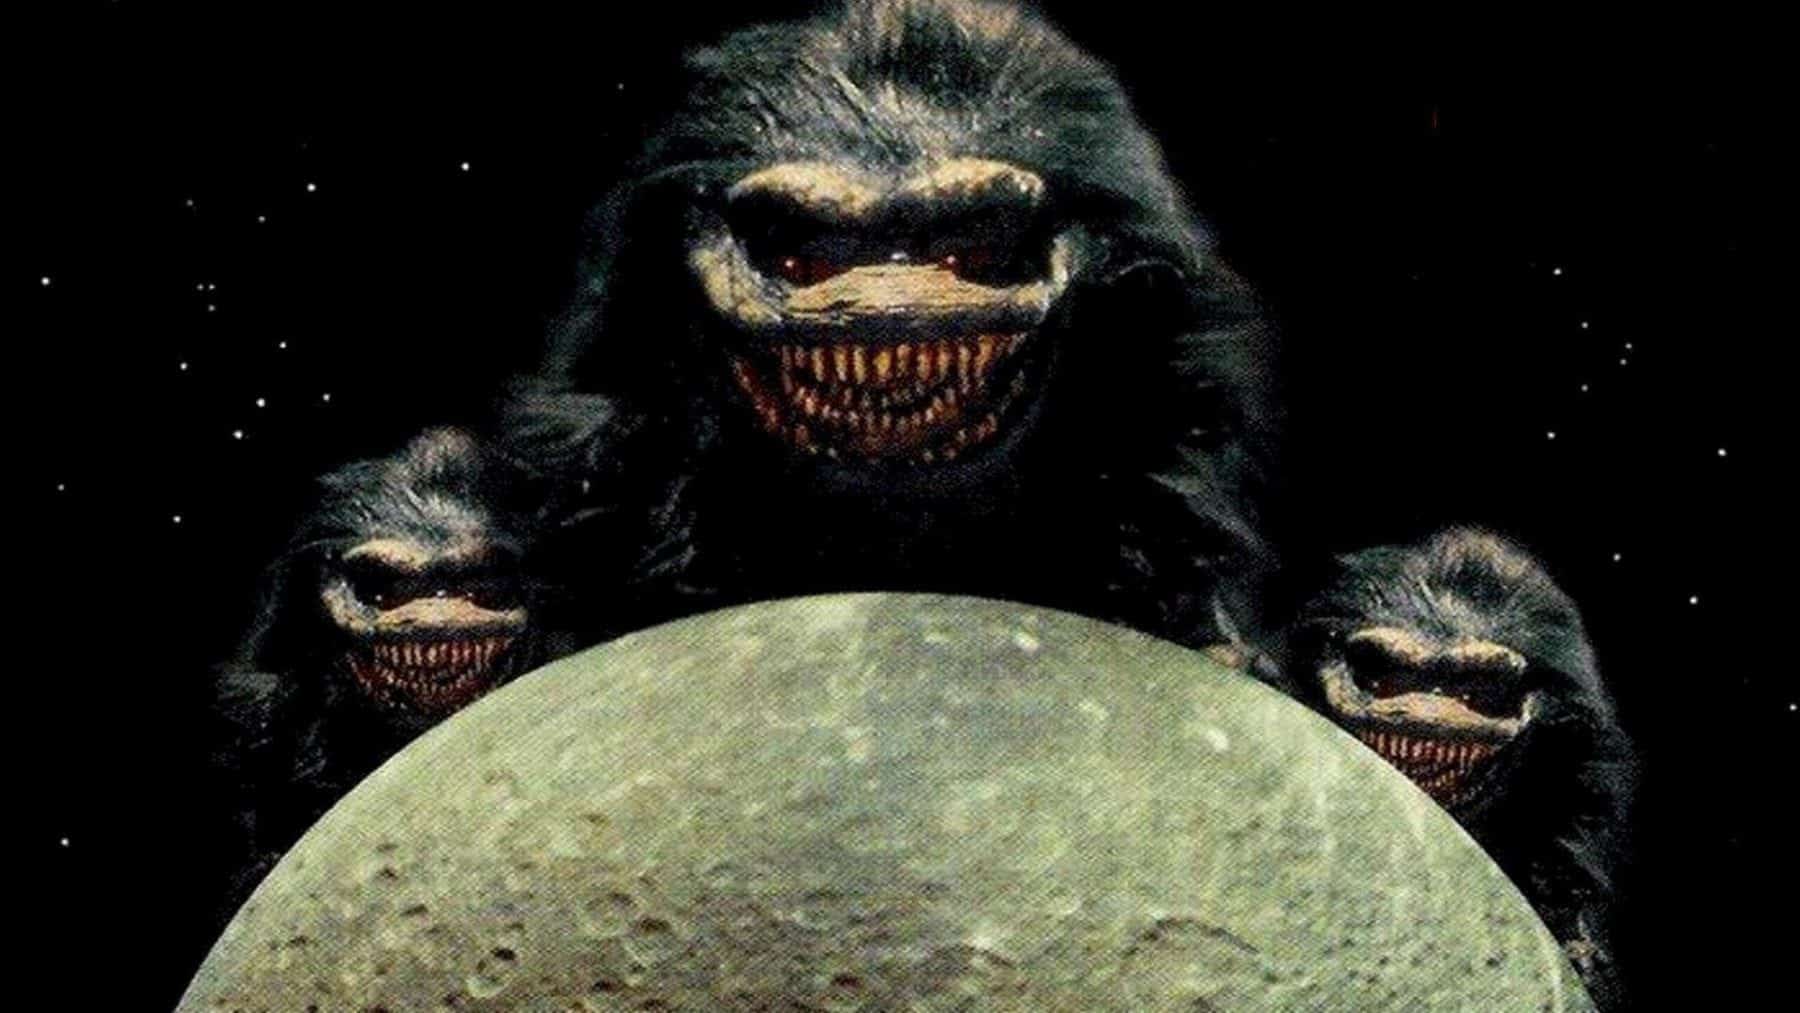 Horror Movie Review: Critters 4 (1992) - Games, Brrraaains & A Head-Banging Life